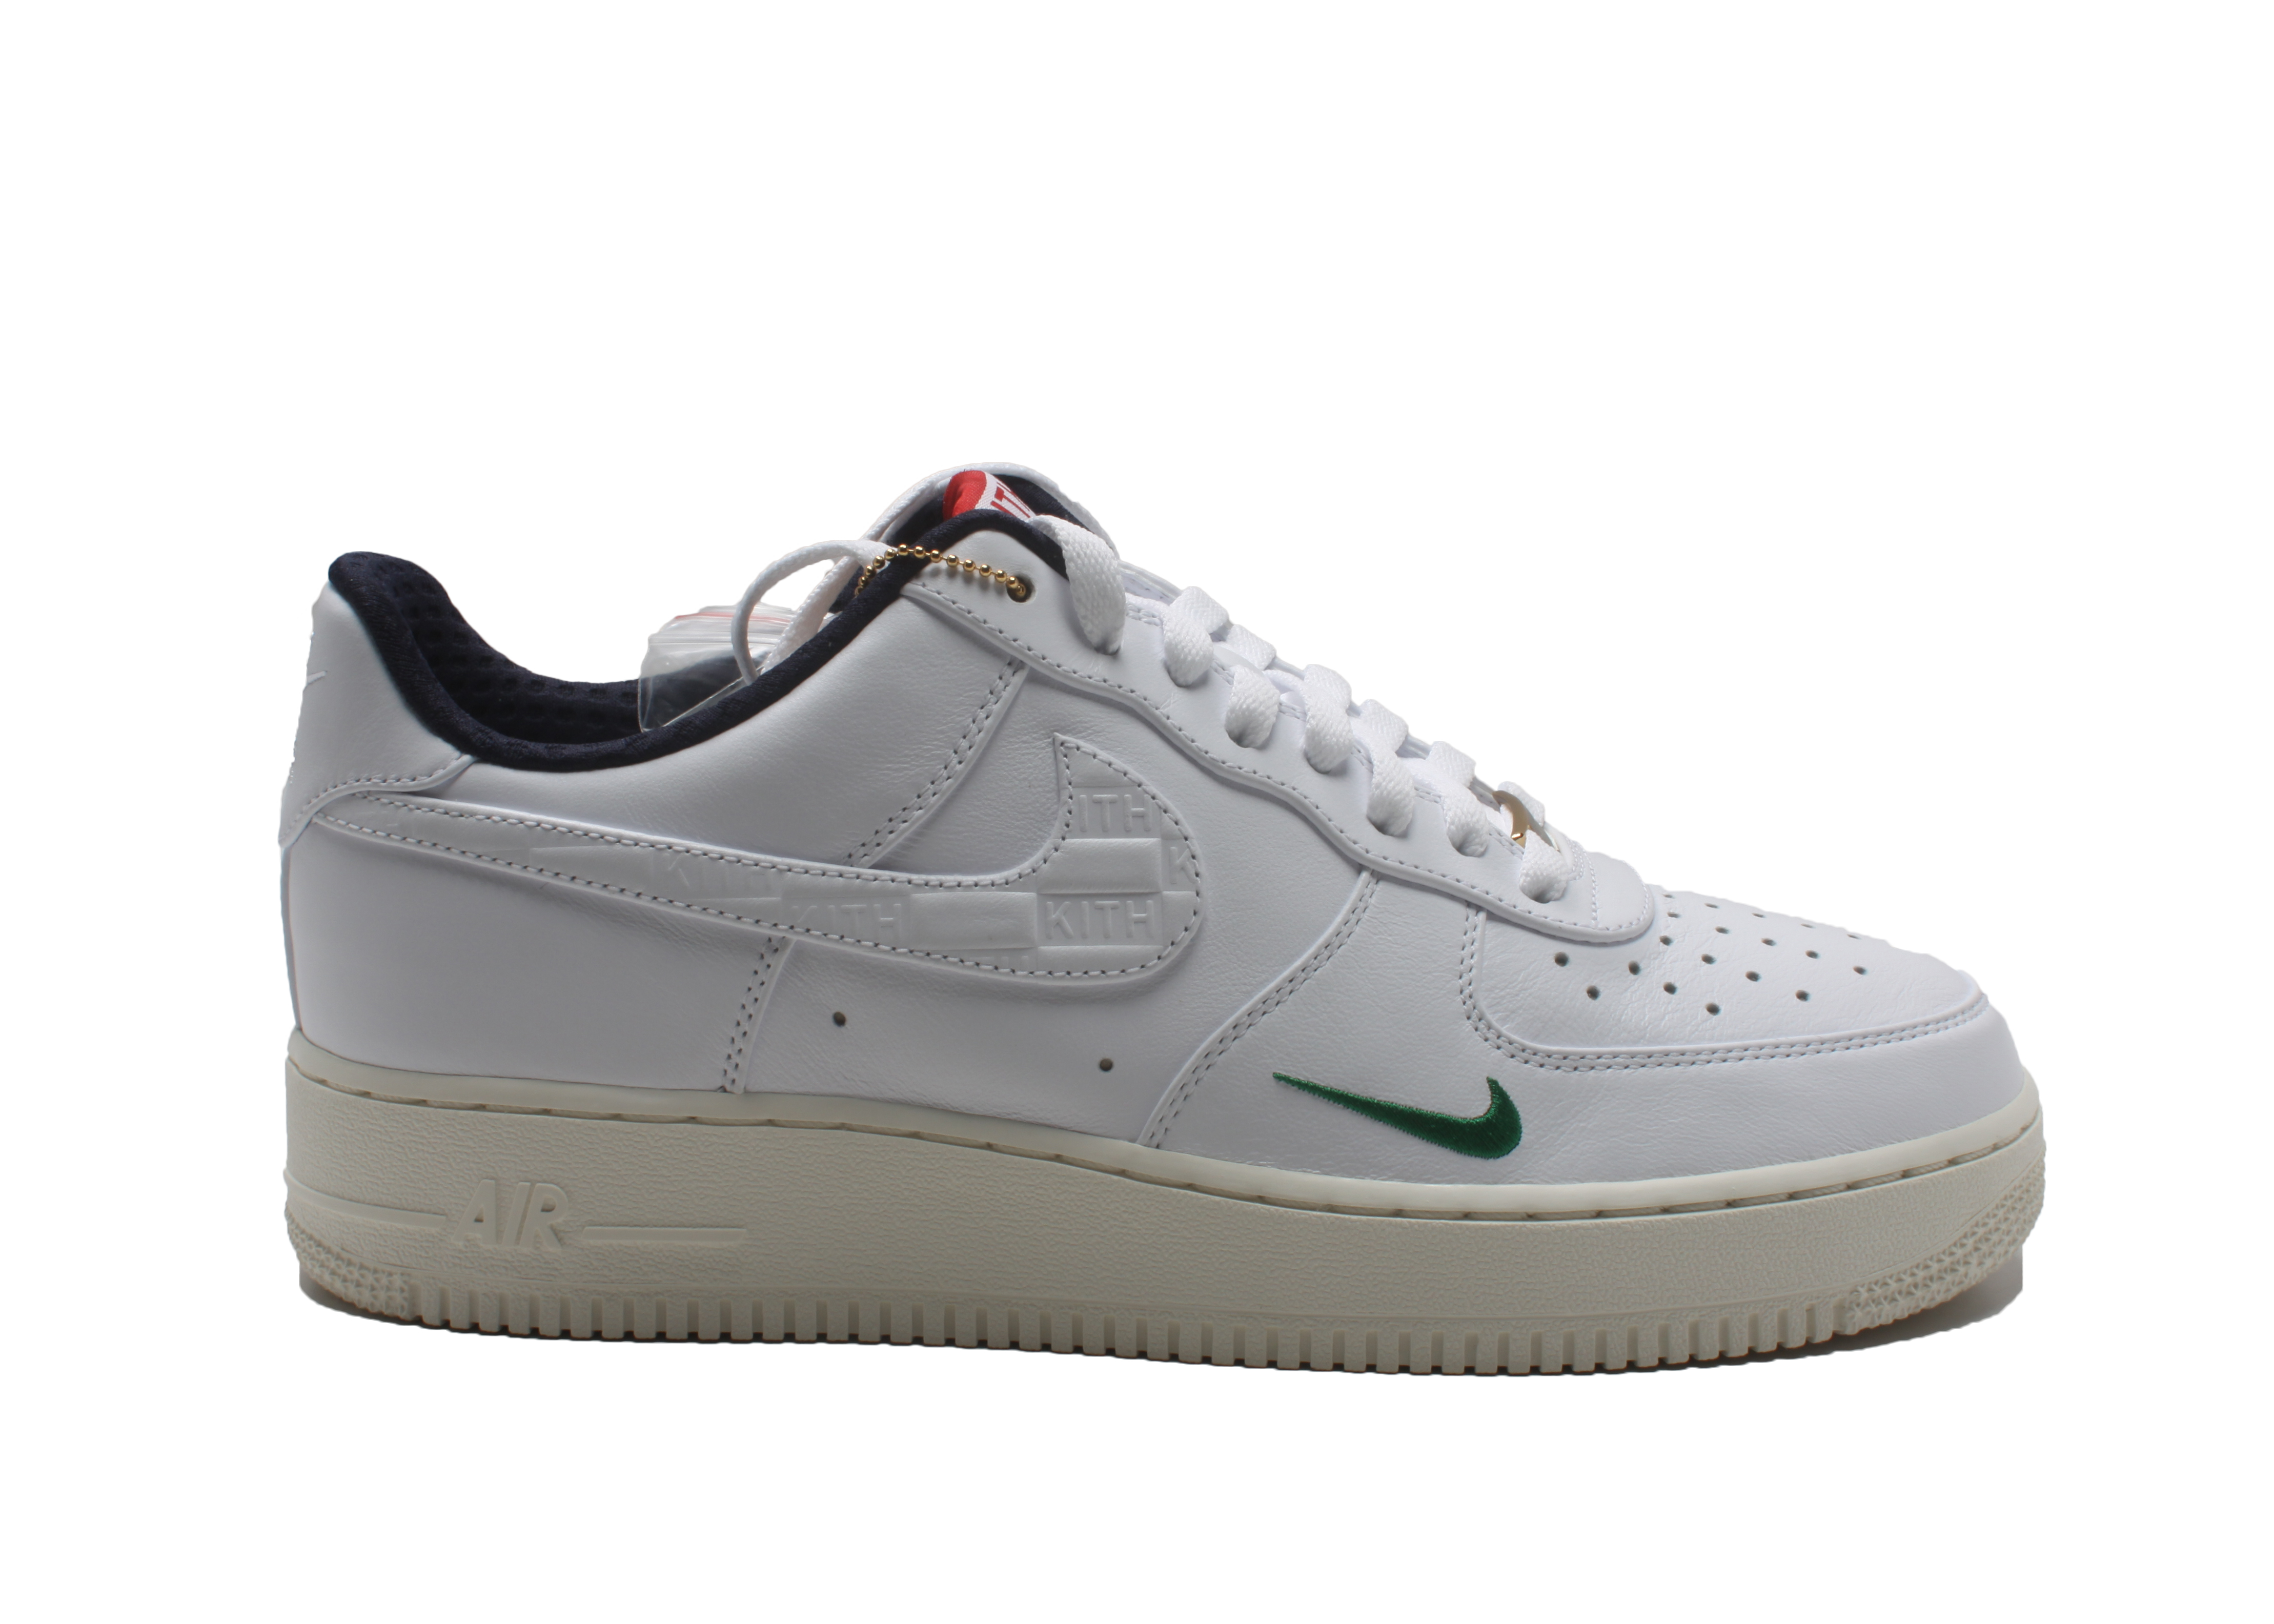 shady records air force 1